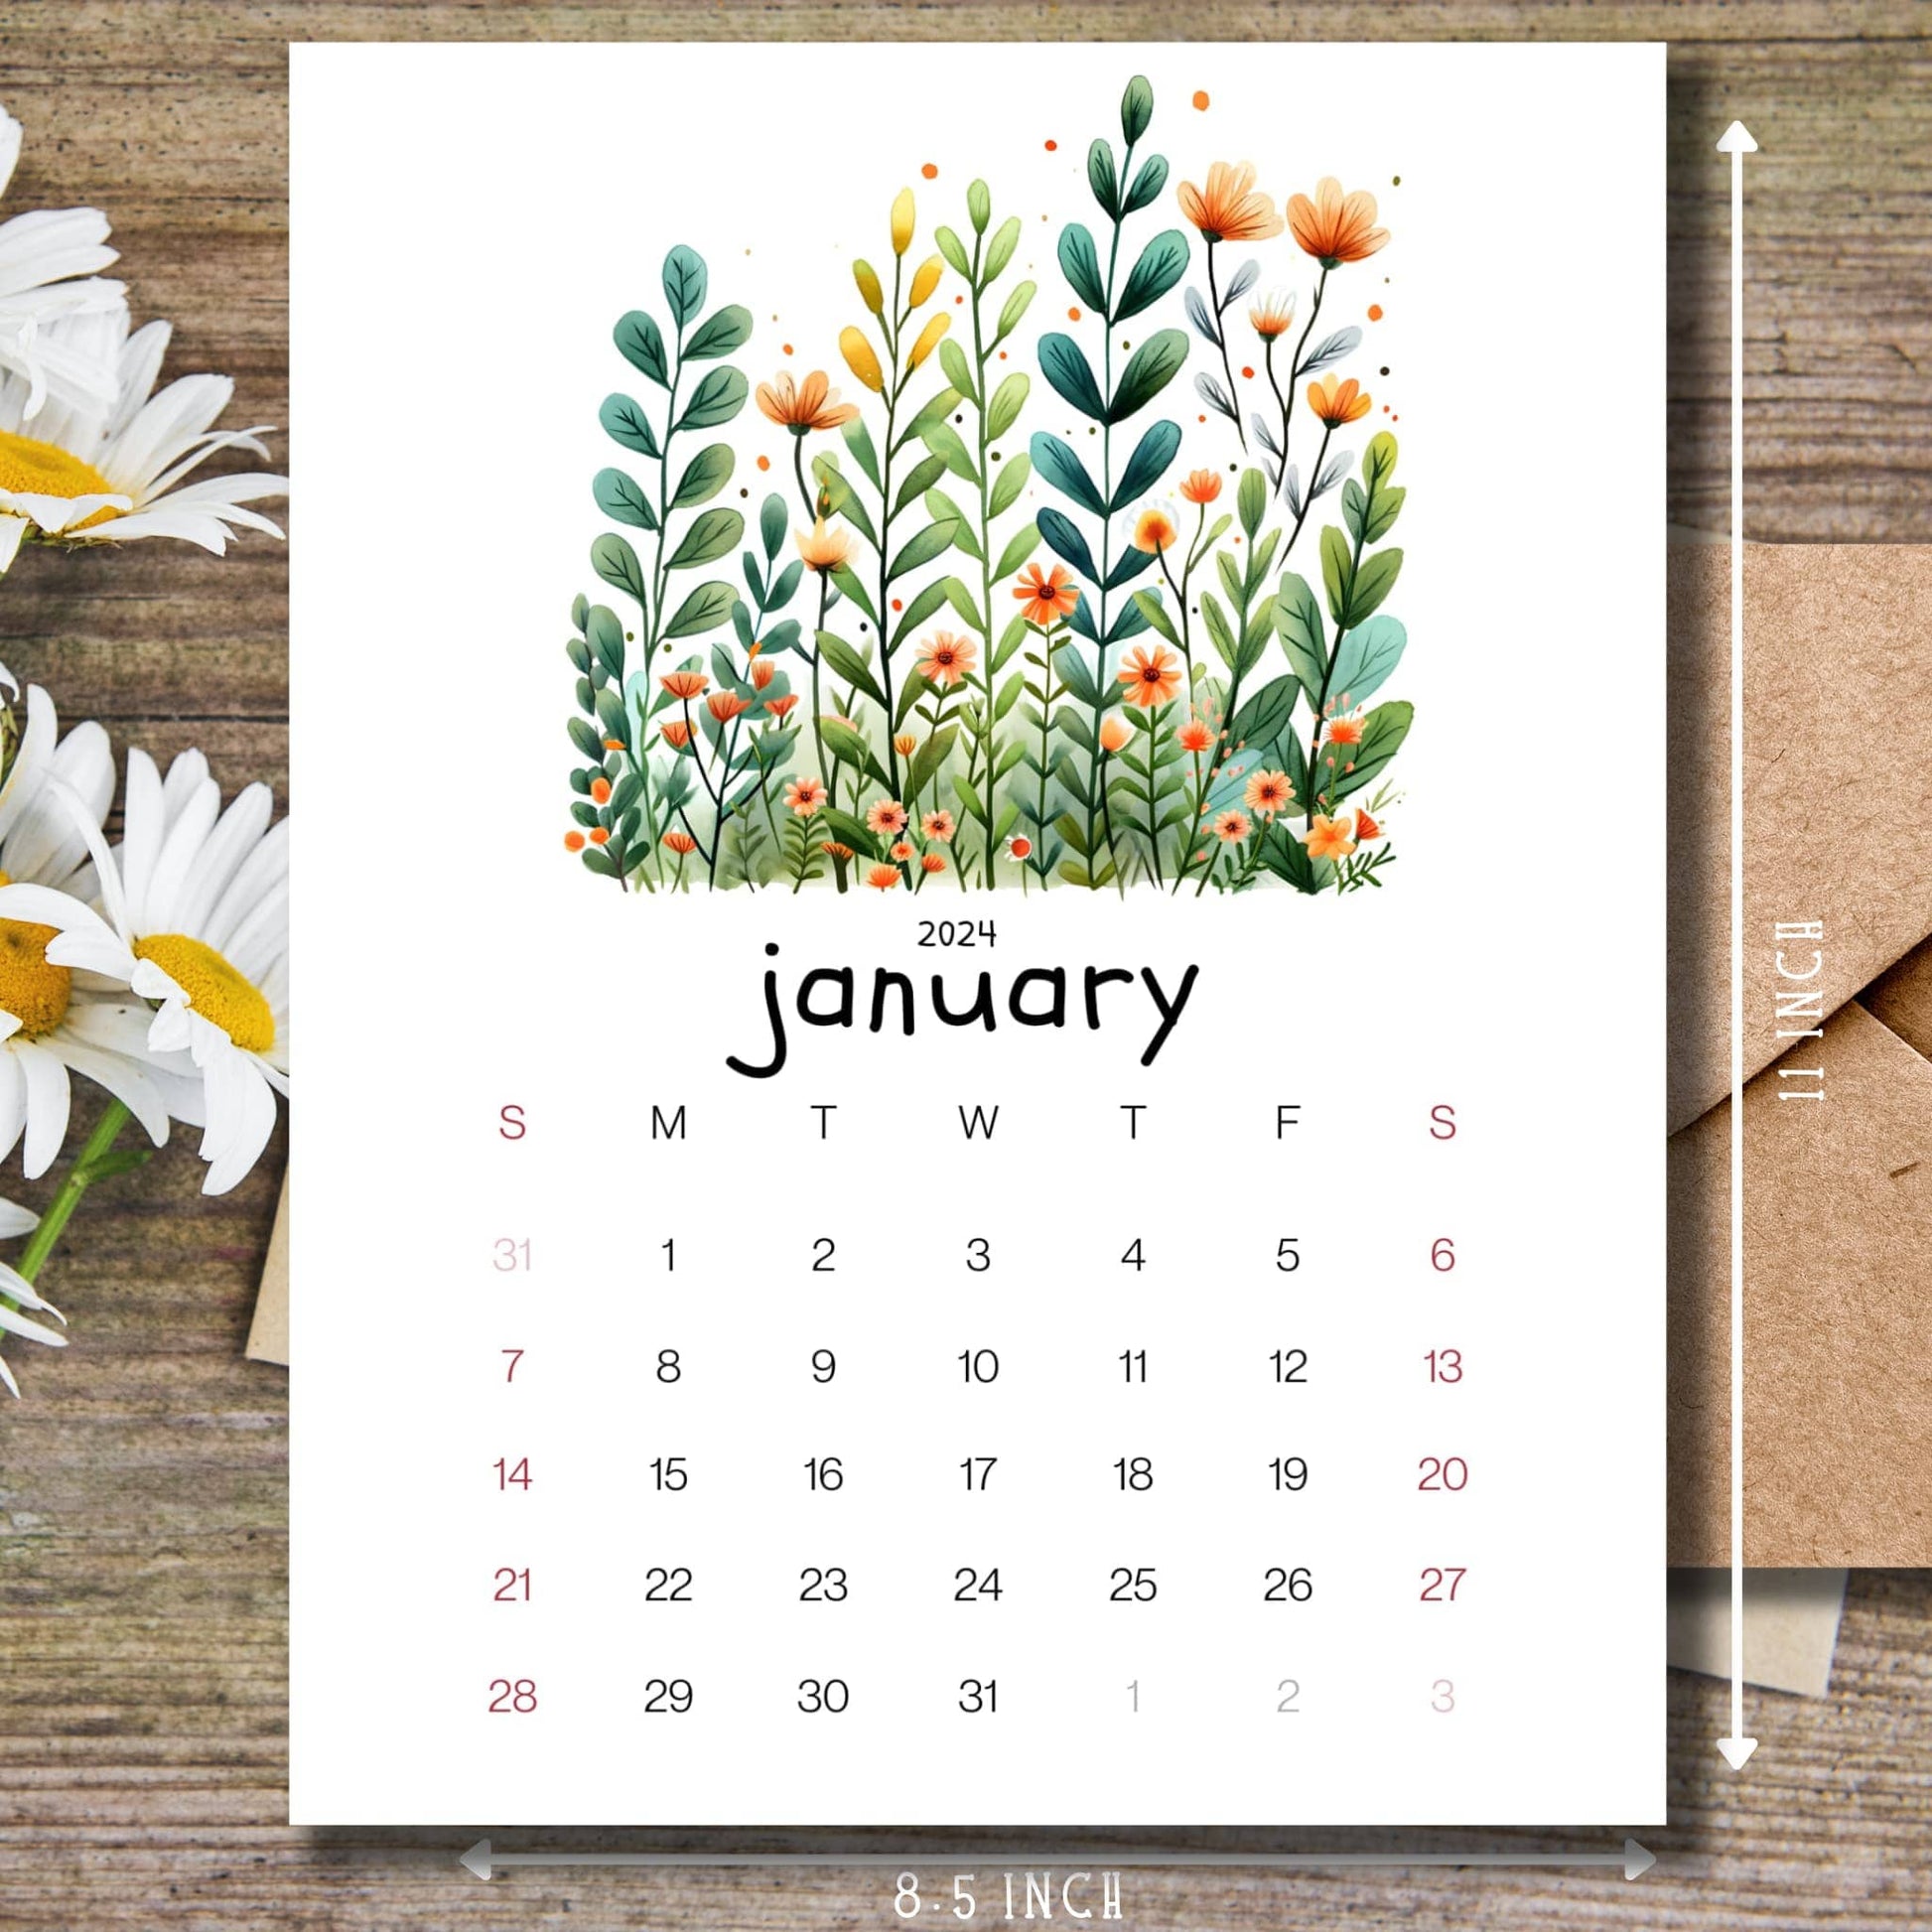 Evergreen Embrace January 2024 calendar on a wooden desk with white flowers and size guide.